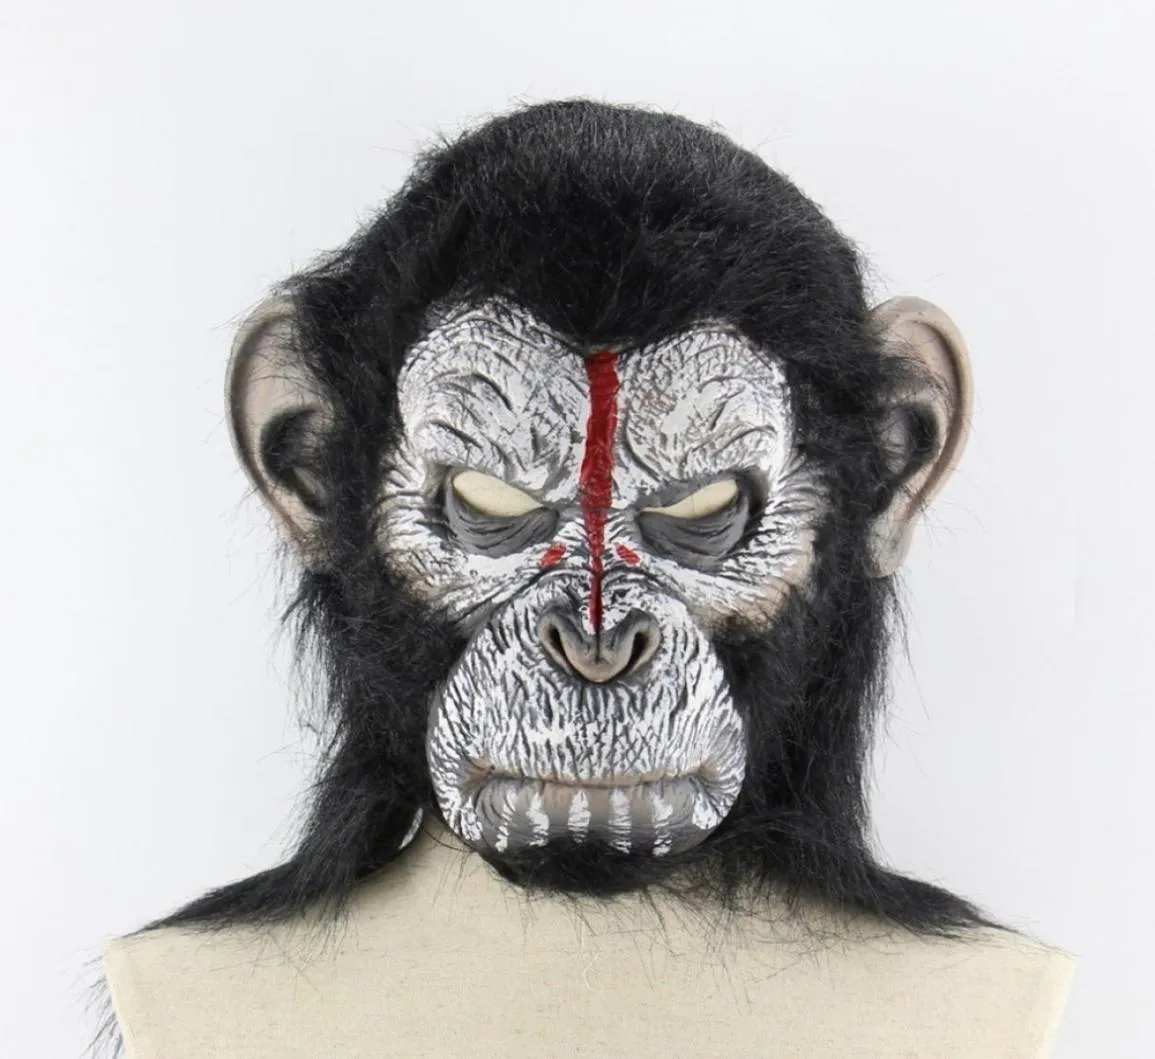 Planet of the Apes Halloween Cosplay Gorilla Masquerad Mask Monkey King Costumes Caps Realistic Monkey Mask Y2001035371531